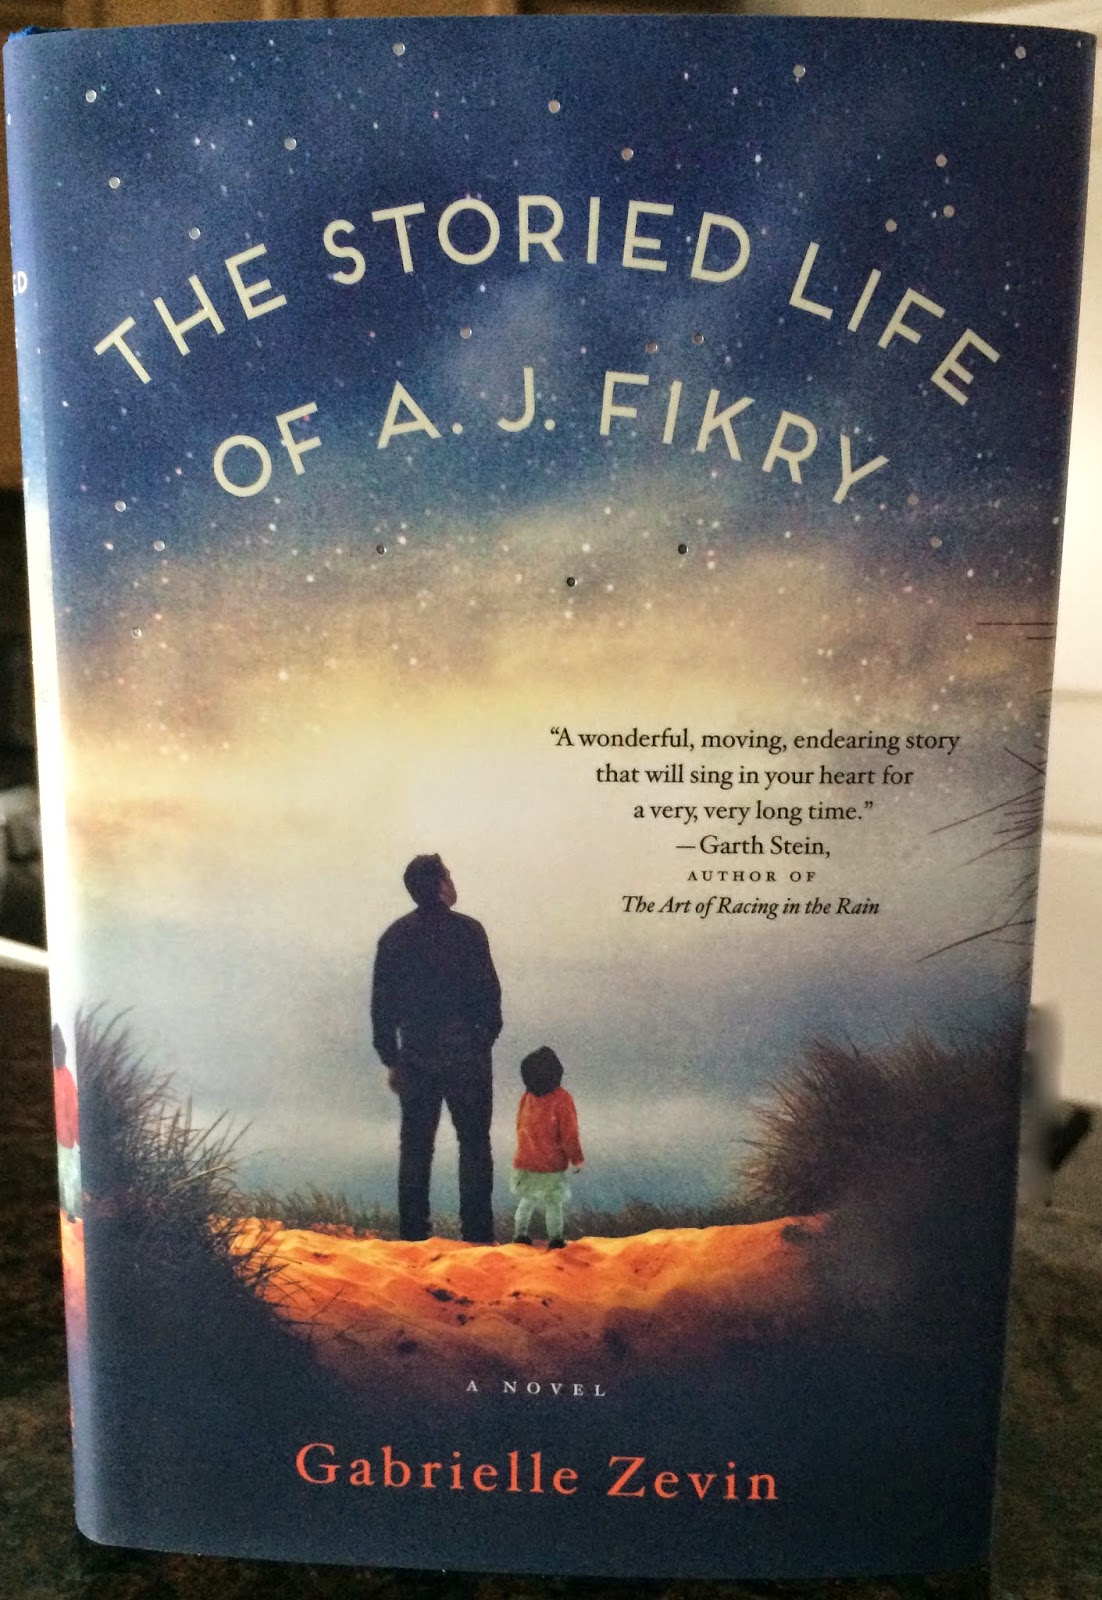 ny times book review the storied life of a.j. fikry